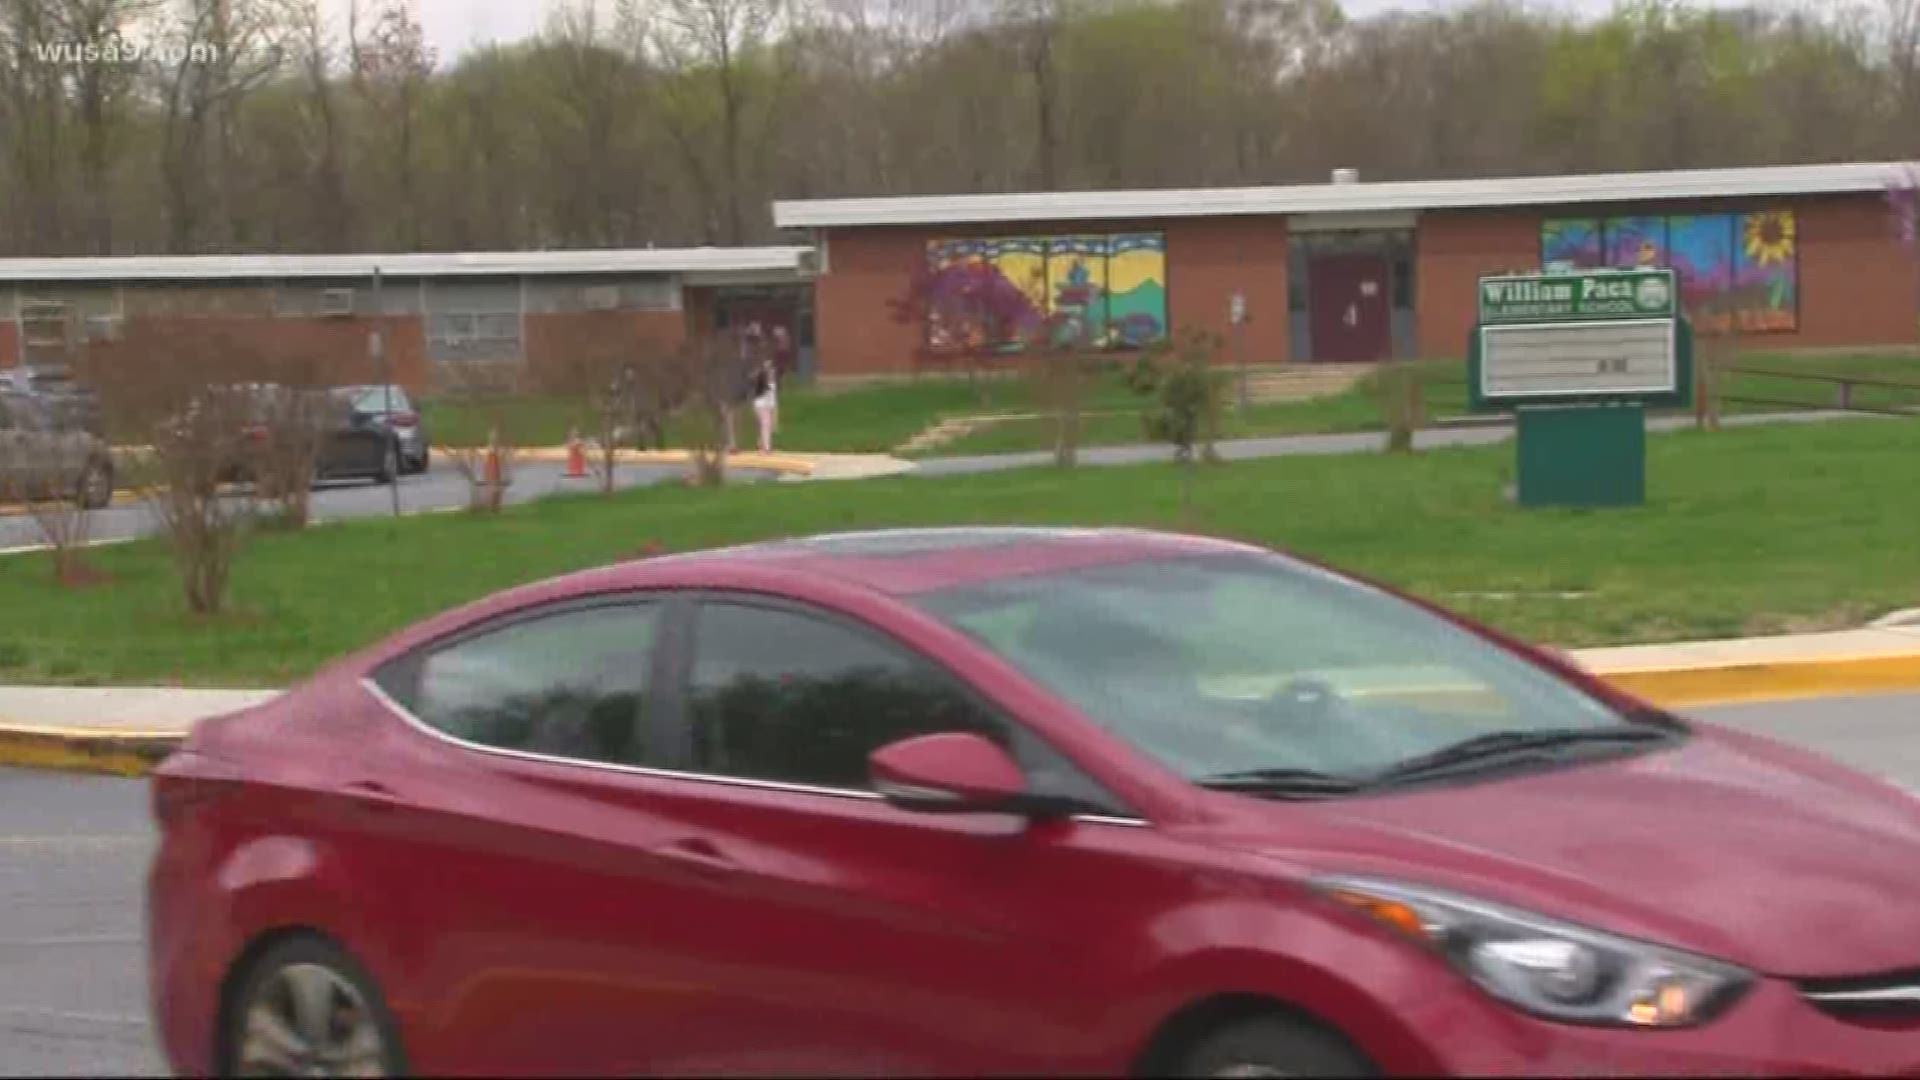 Seven students at William Paca Elementary School took blades out of pencil sharpeners and cut themselves at school, according to Prince Georges County school officials. 